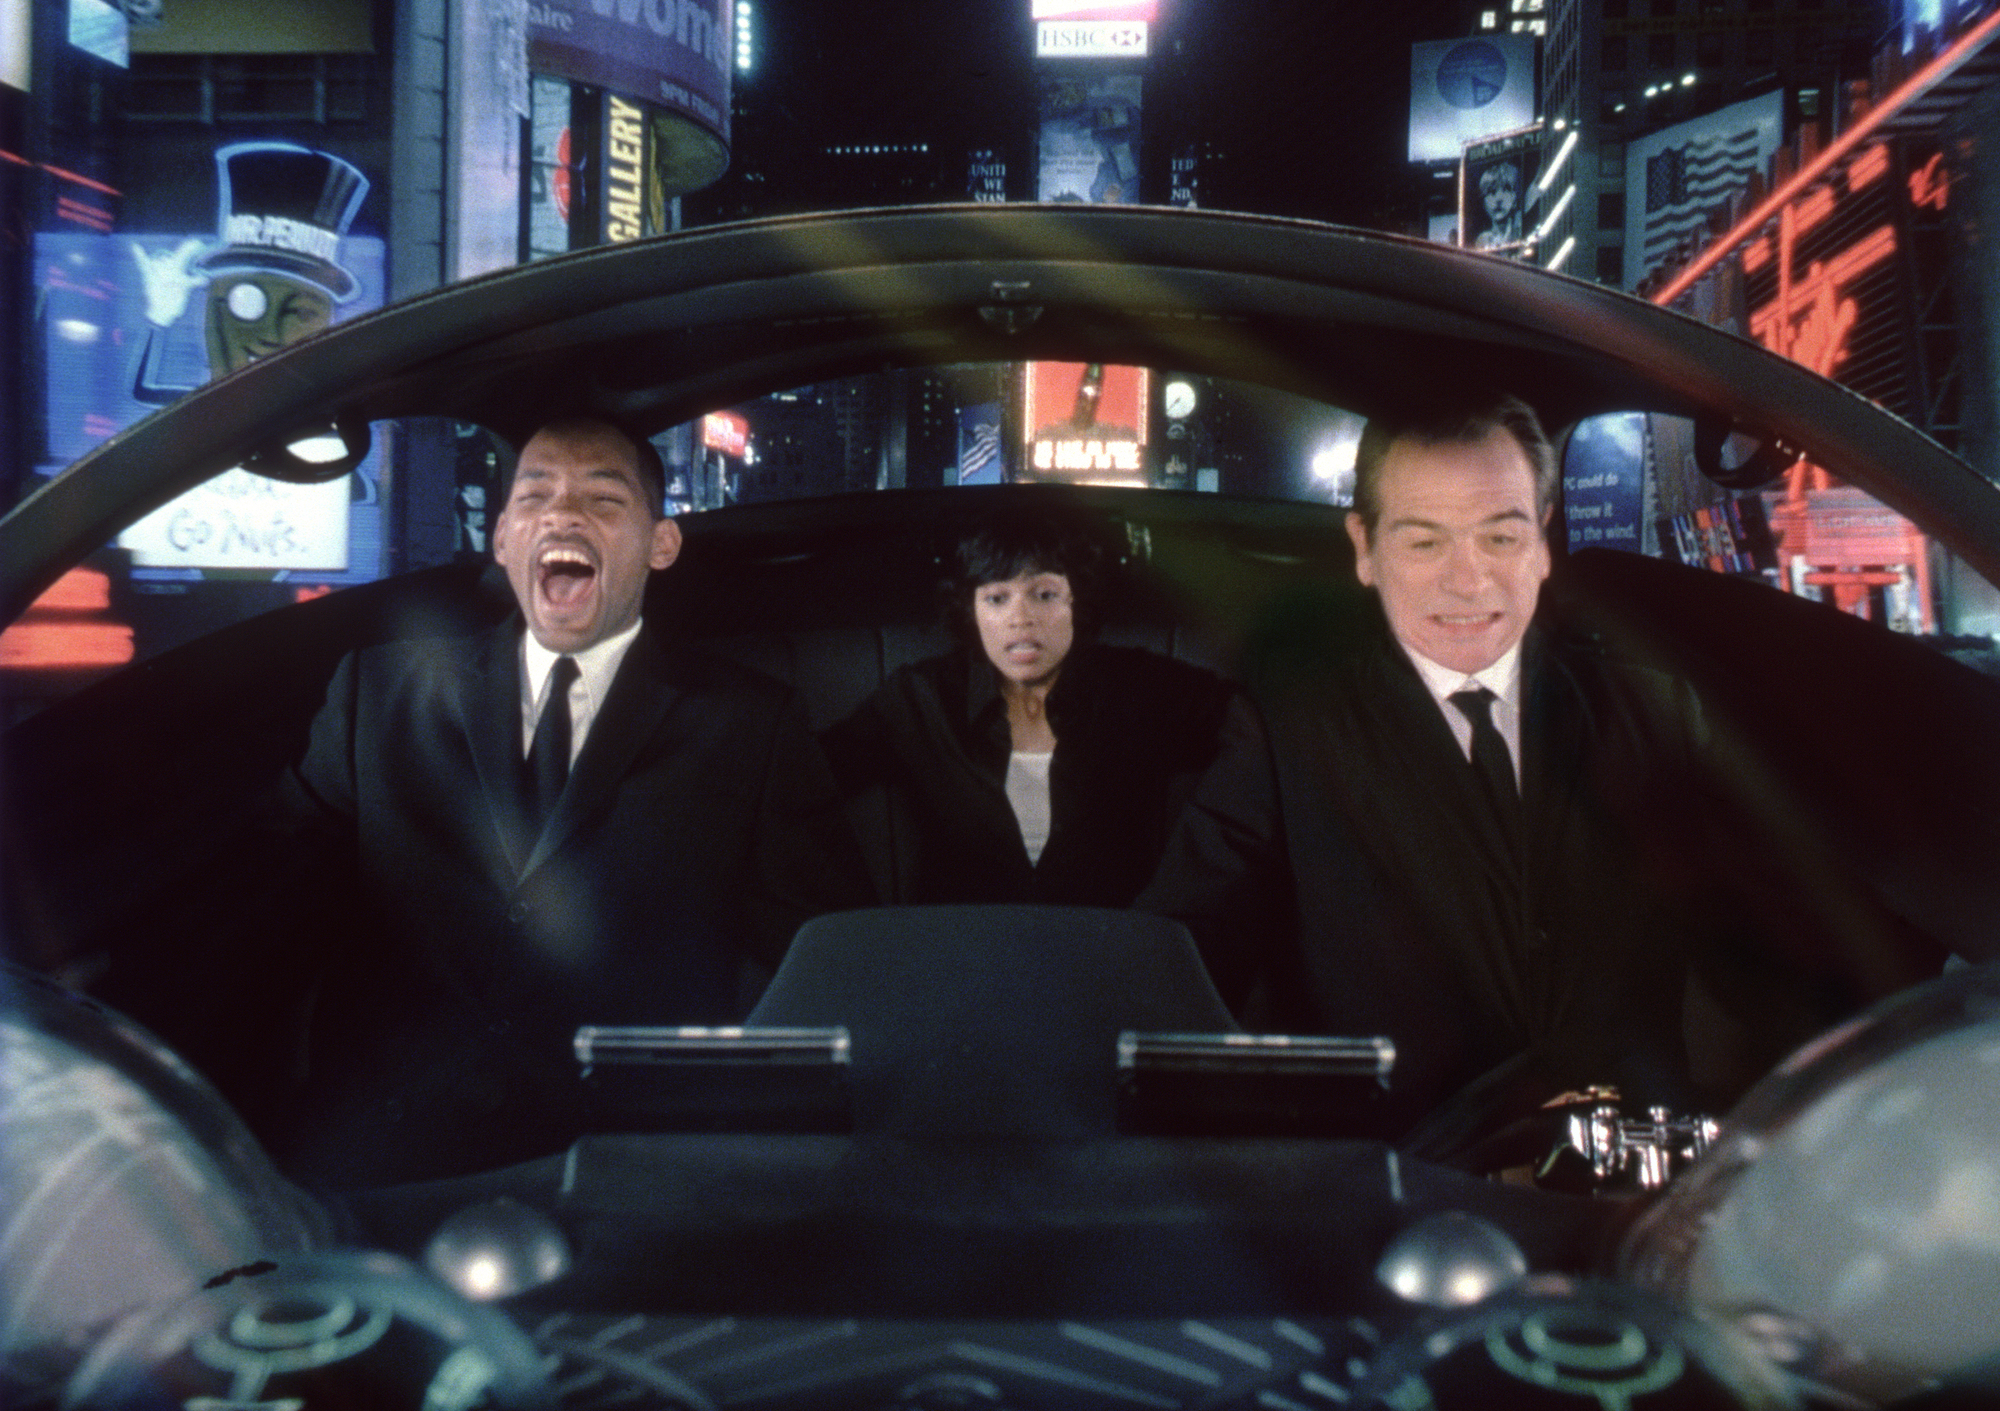 Men in Black / Men in Black 2 / Men in Black 3 (DVD Sony) - image 3 of 5